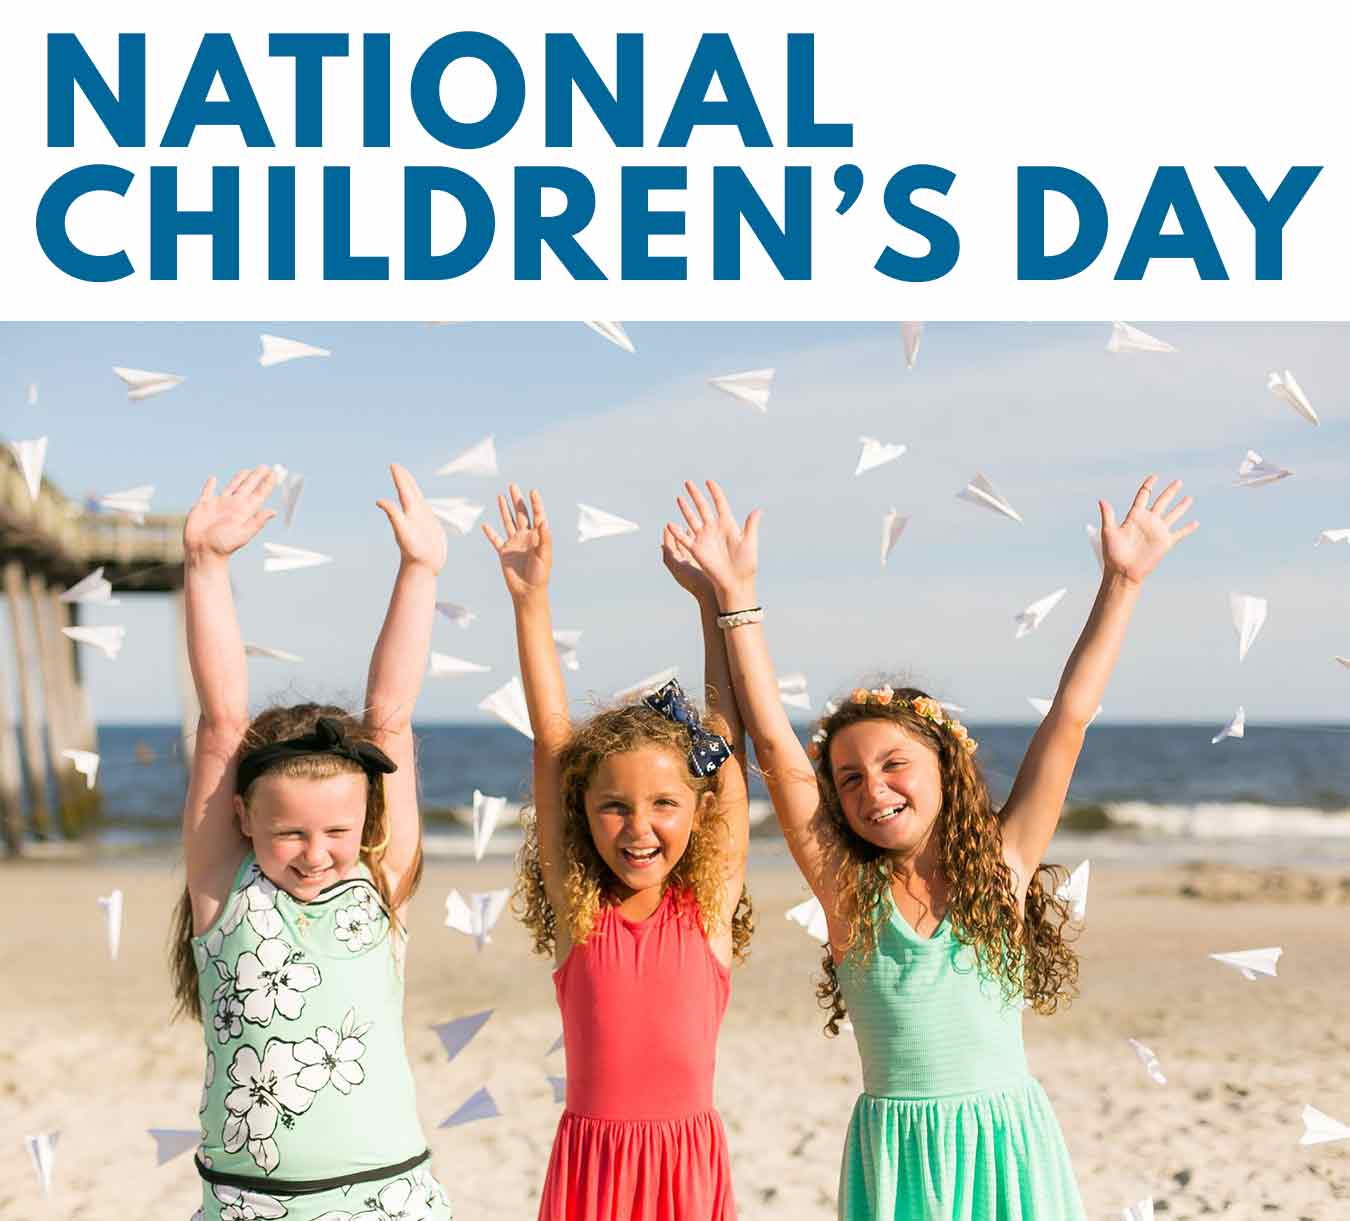 How To Celebrate National Children’s Day With Your Child